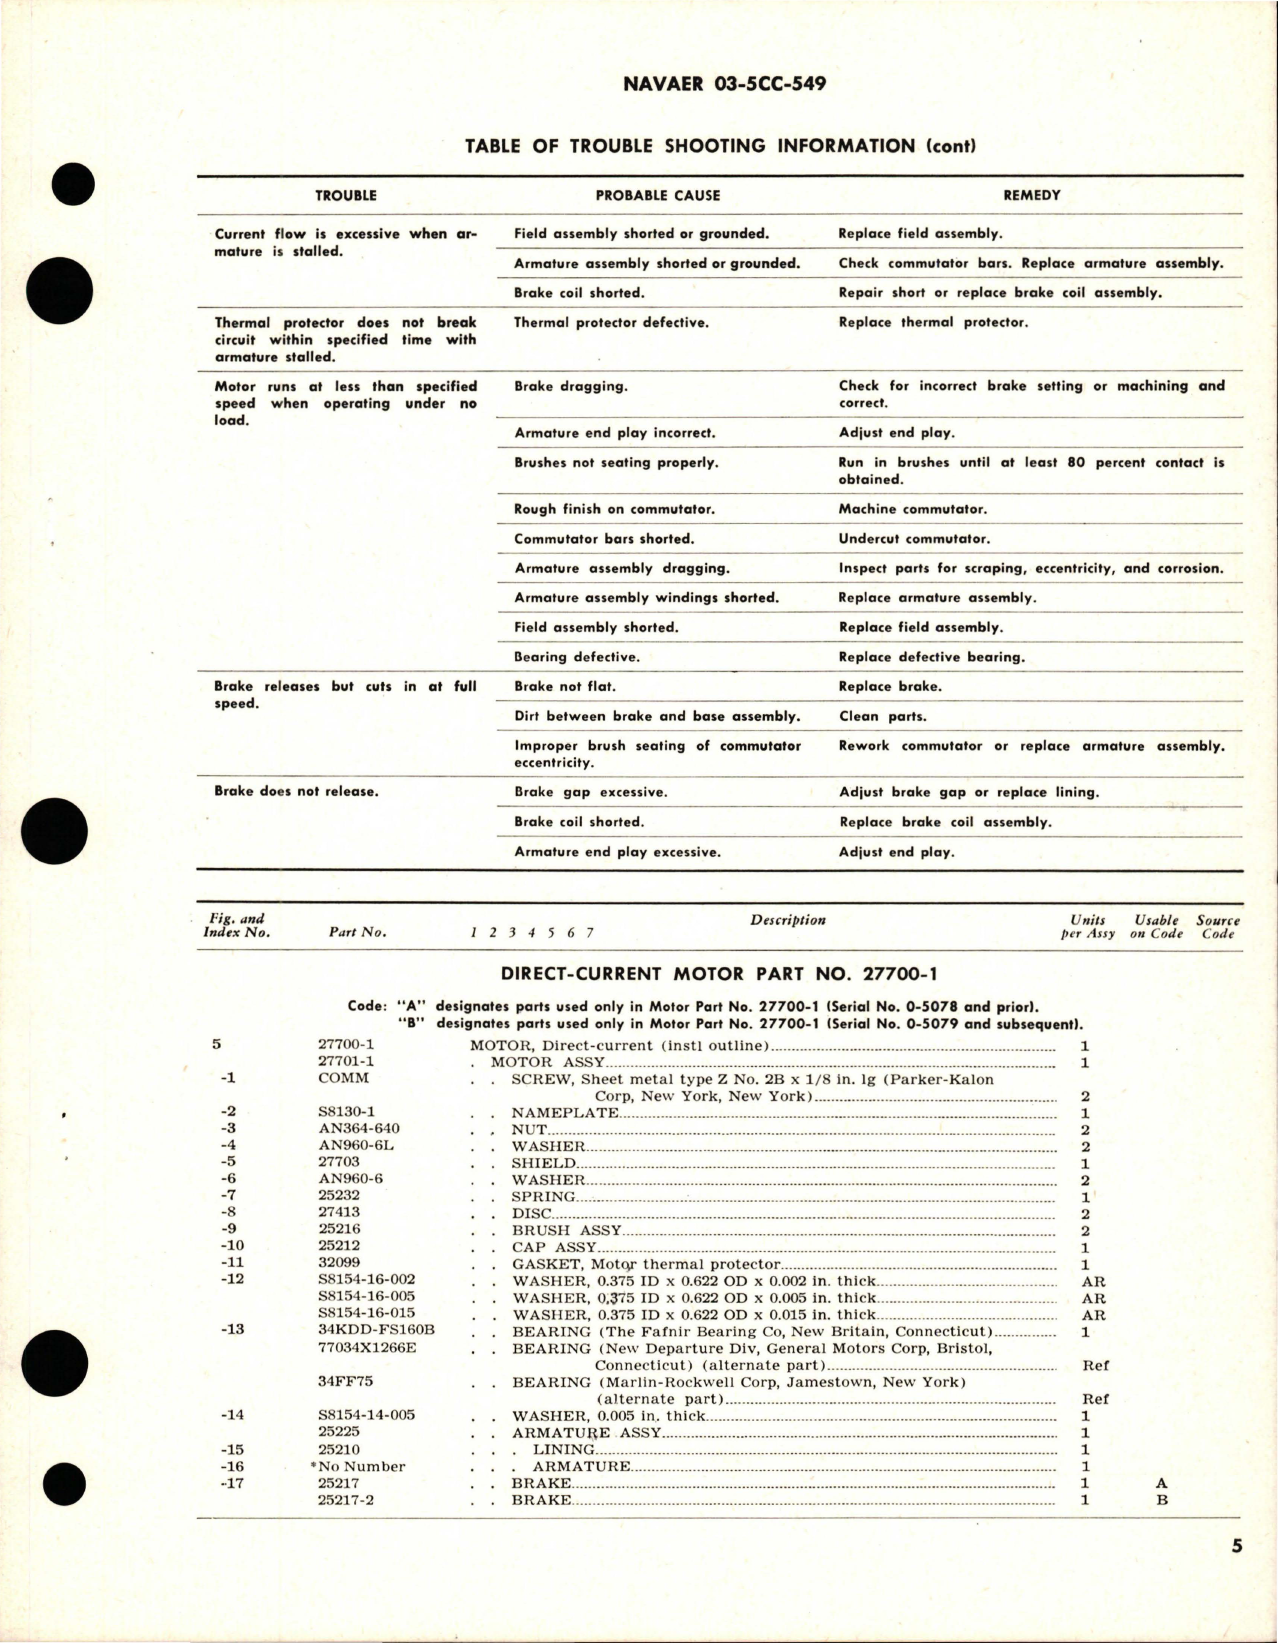 Sample page 5 from AirCorps Library document: Overhaul Instructions with Parts Breakdown for Direct-Current Motor - Part 27700-1